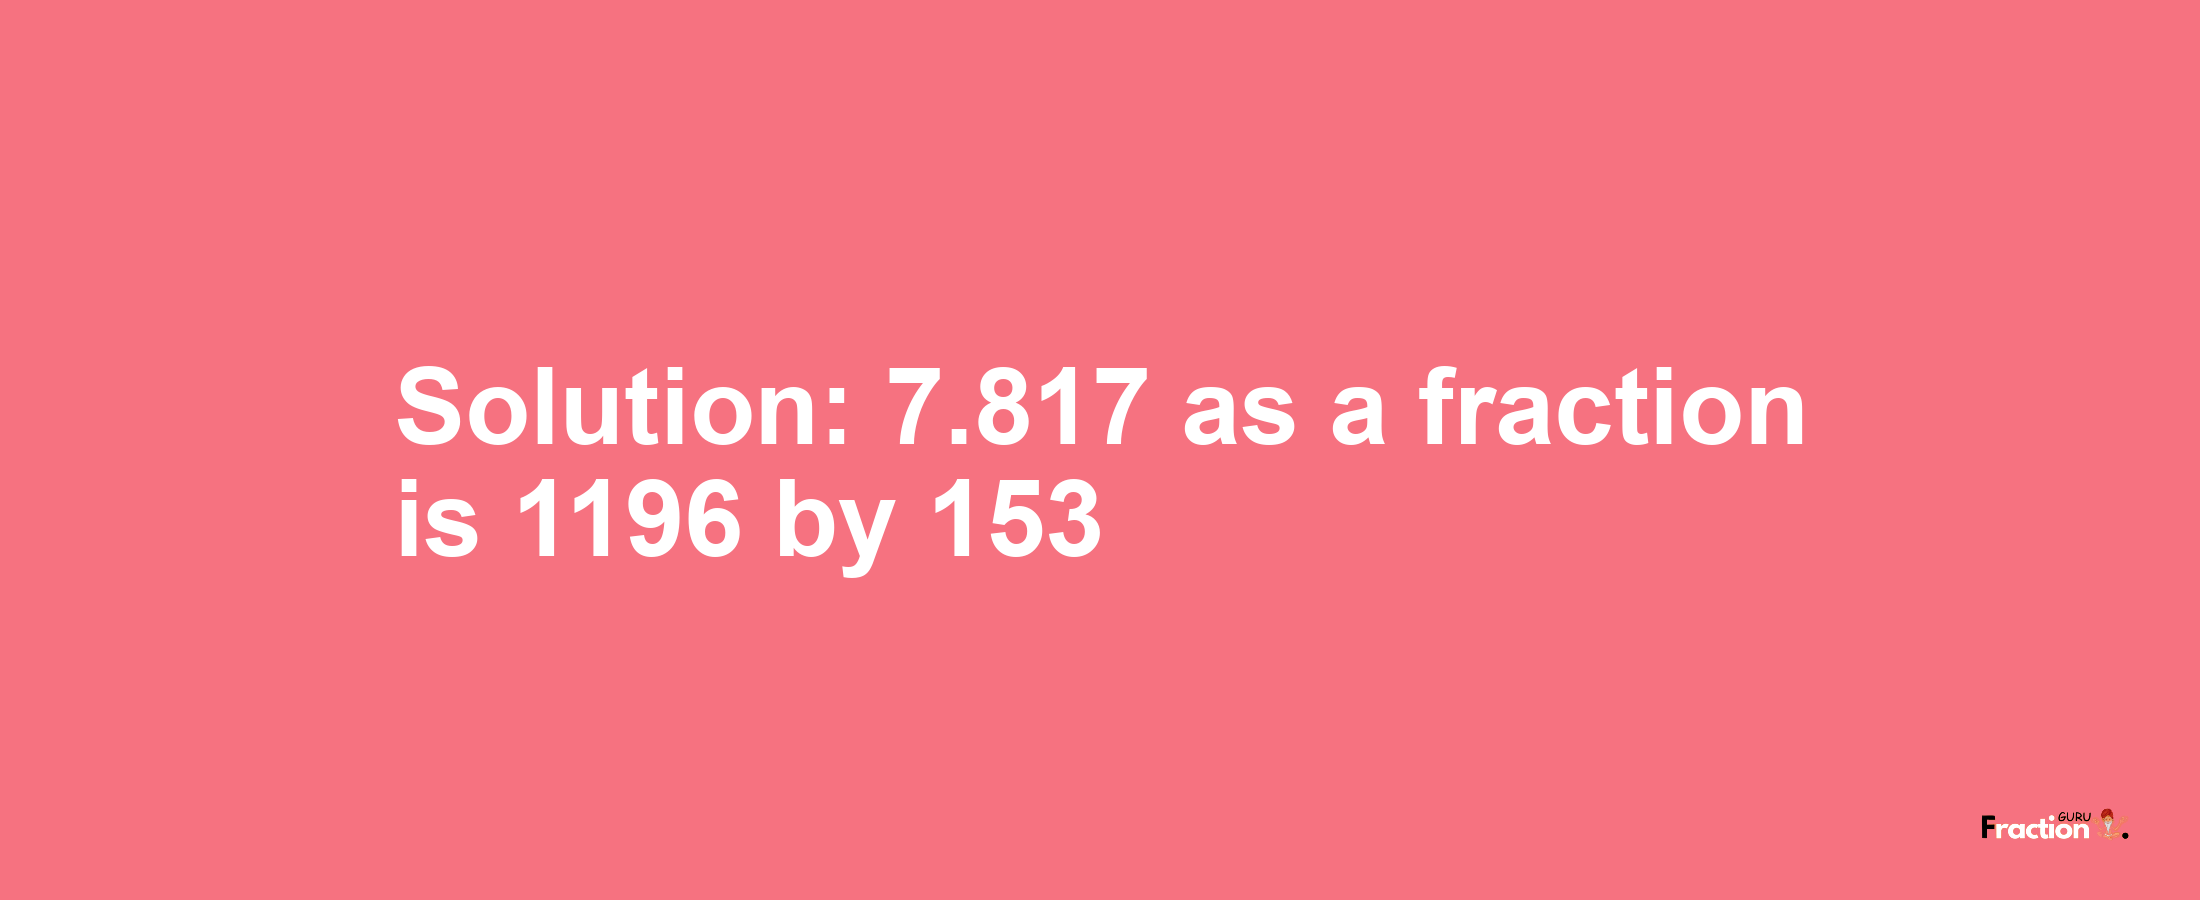 Solution:7.817 as a fraction is 1196/153